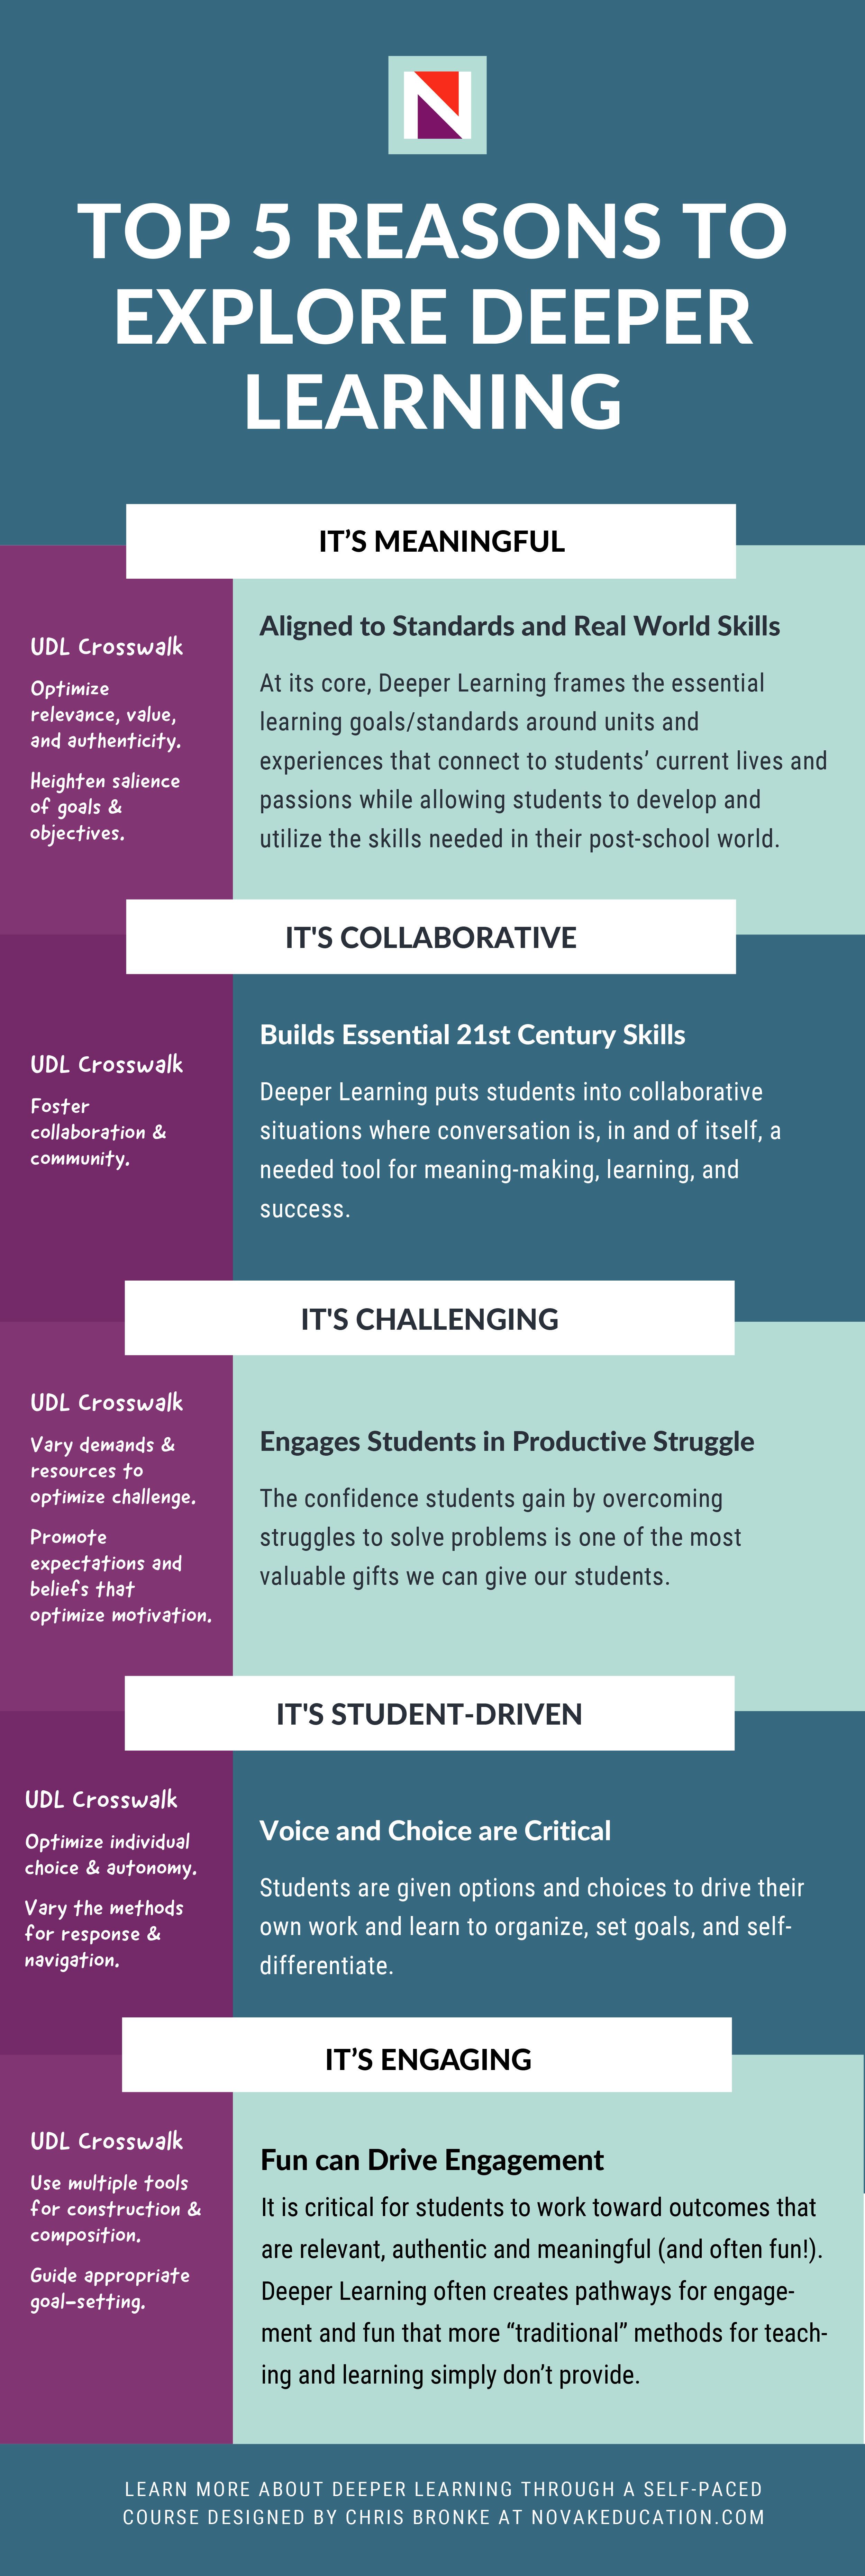 TOP 5 REASONS TO EXPLORE DEEPER LEARNING Infographic